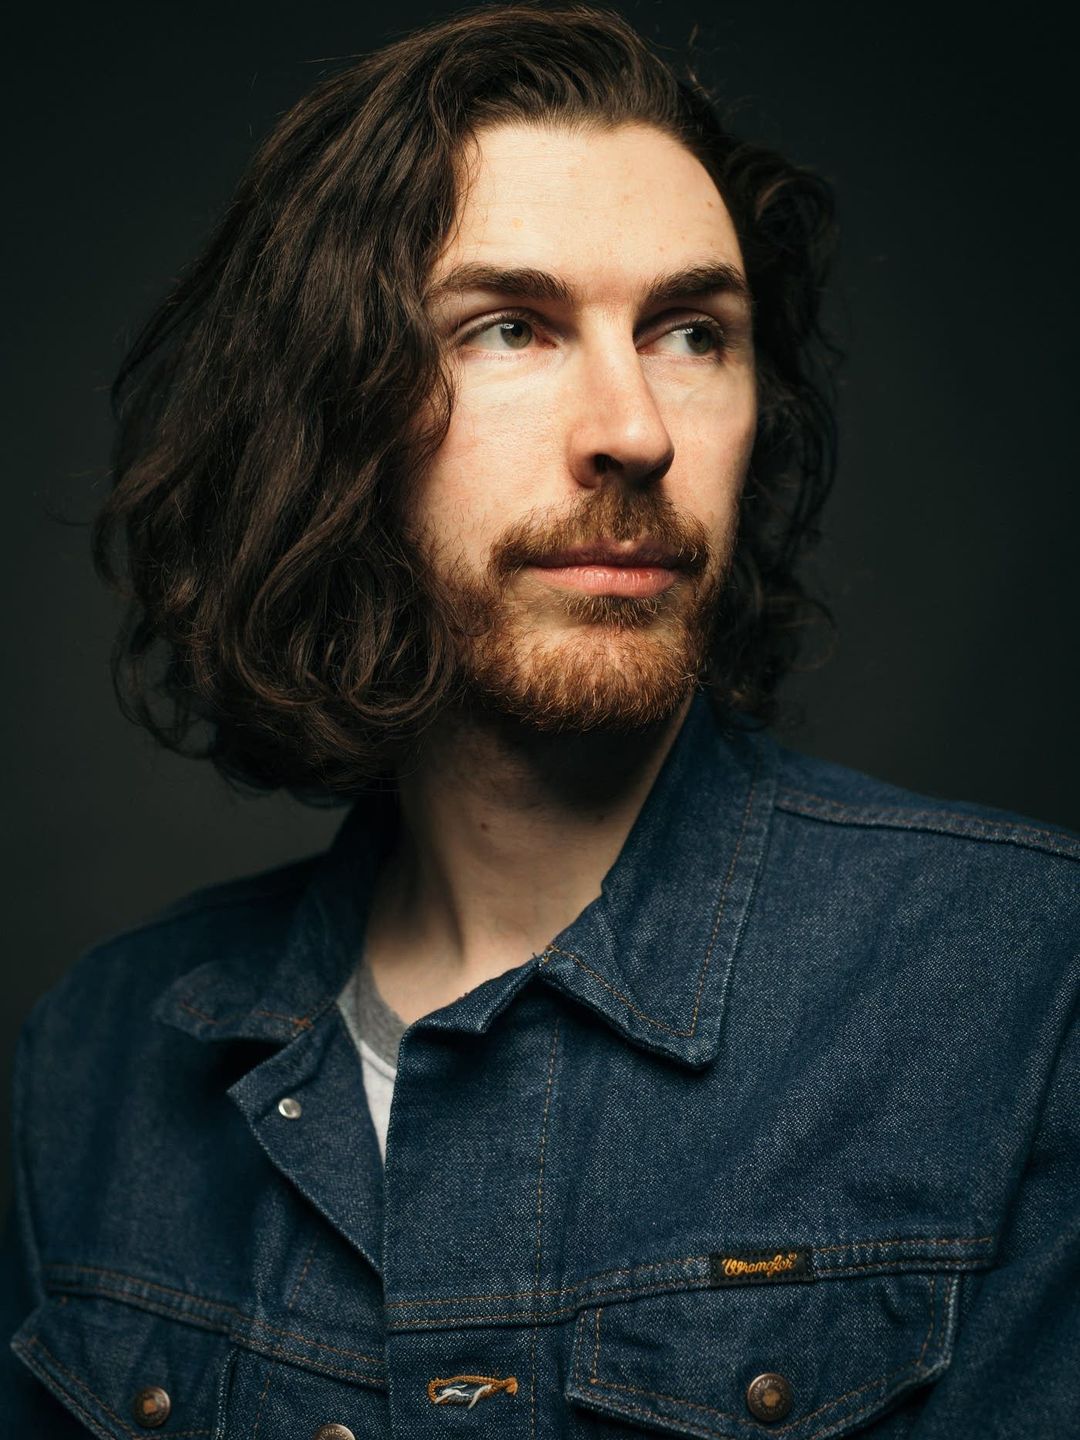 Hozier young age